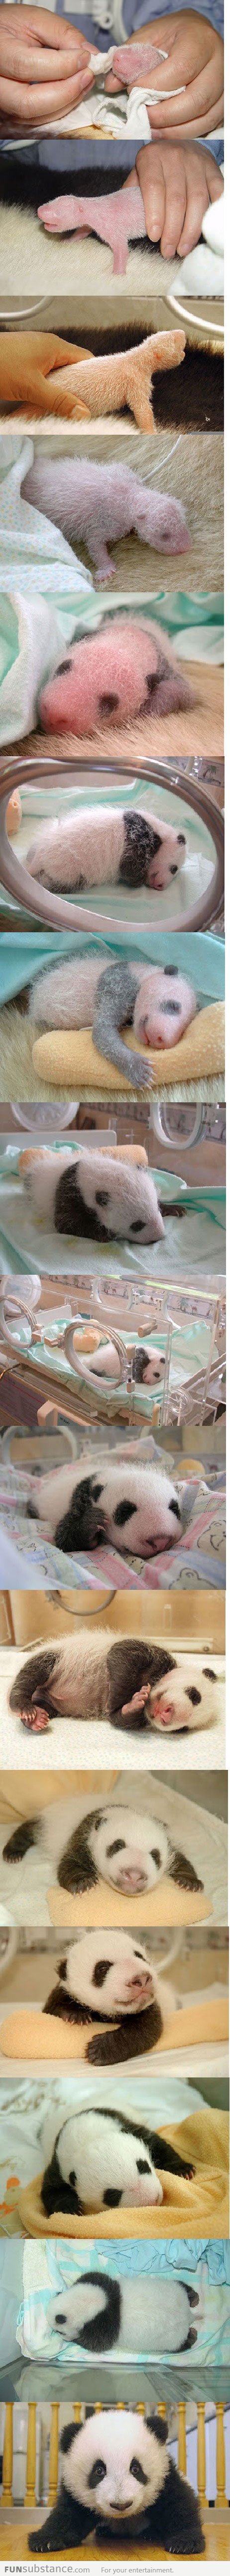 Baby Panda comes to the world